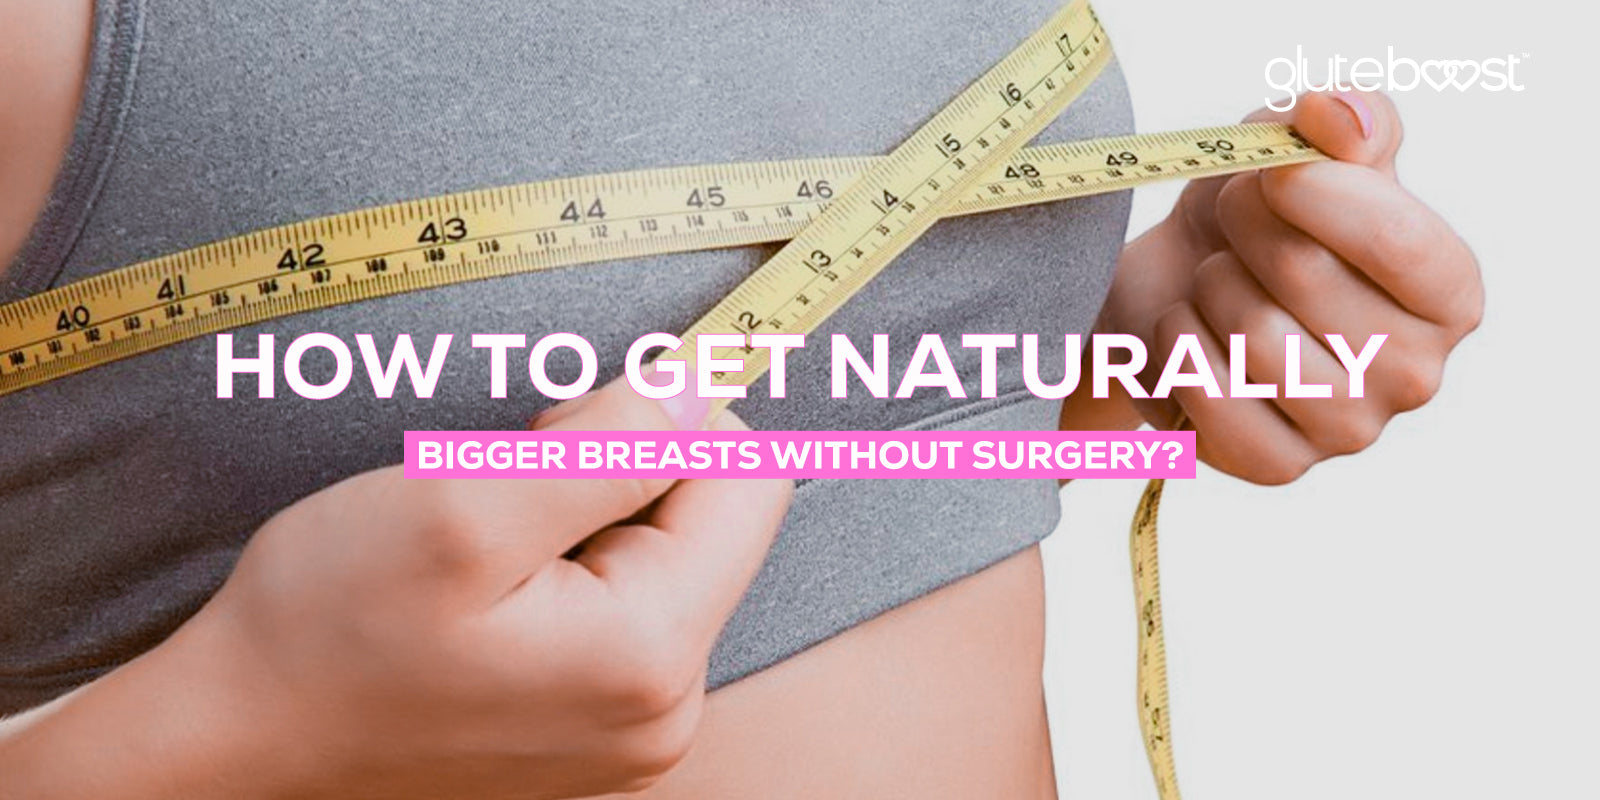 How to Get Naturally Bigger Breasts Without Surgery?